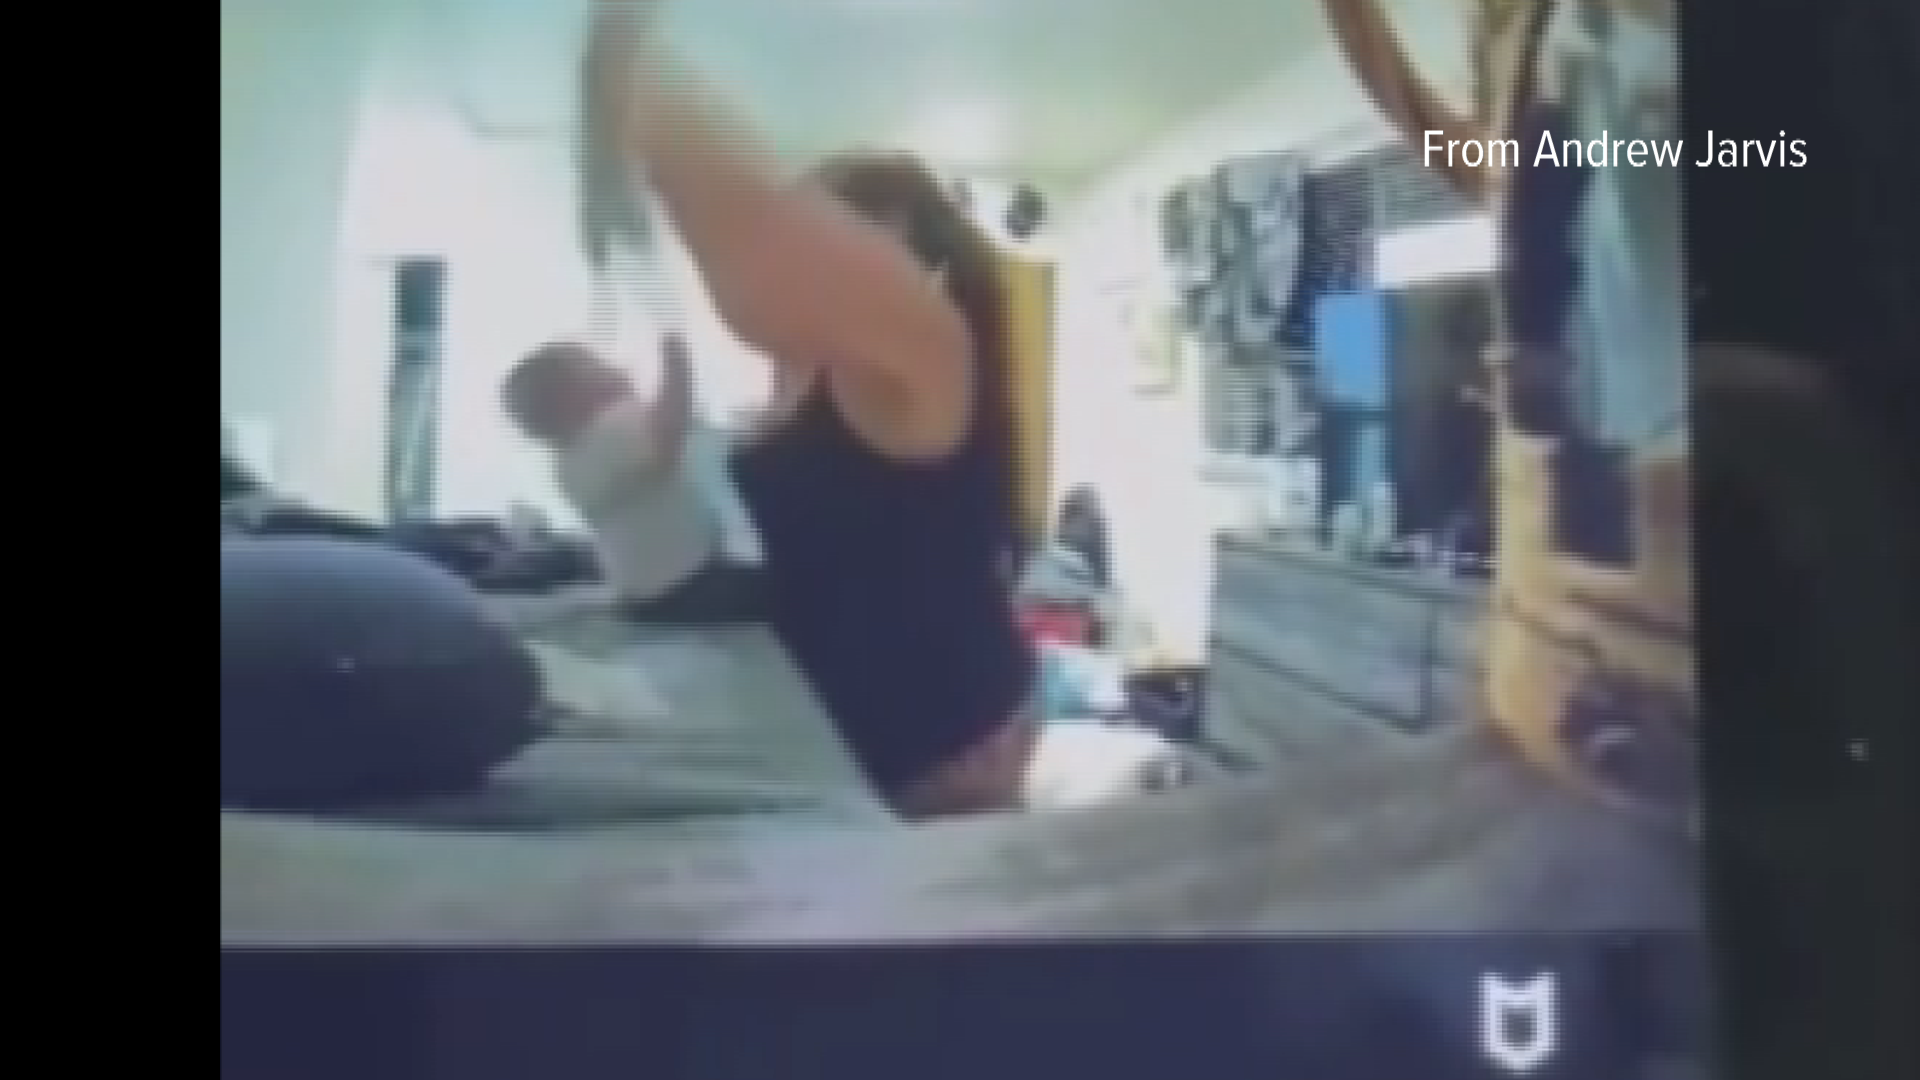 The woman was captured on the parents' GoPro camera hitting and jerking around the 7-month-old baby.